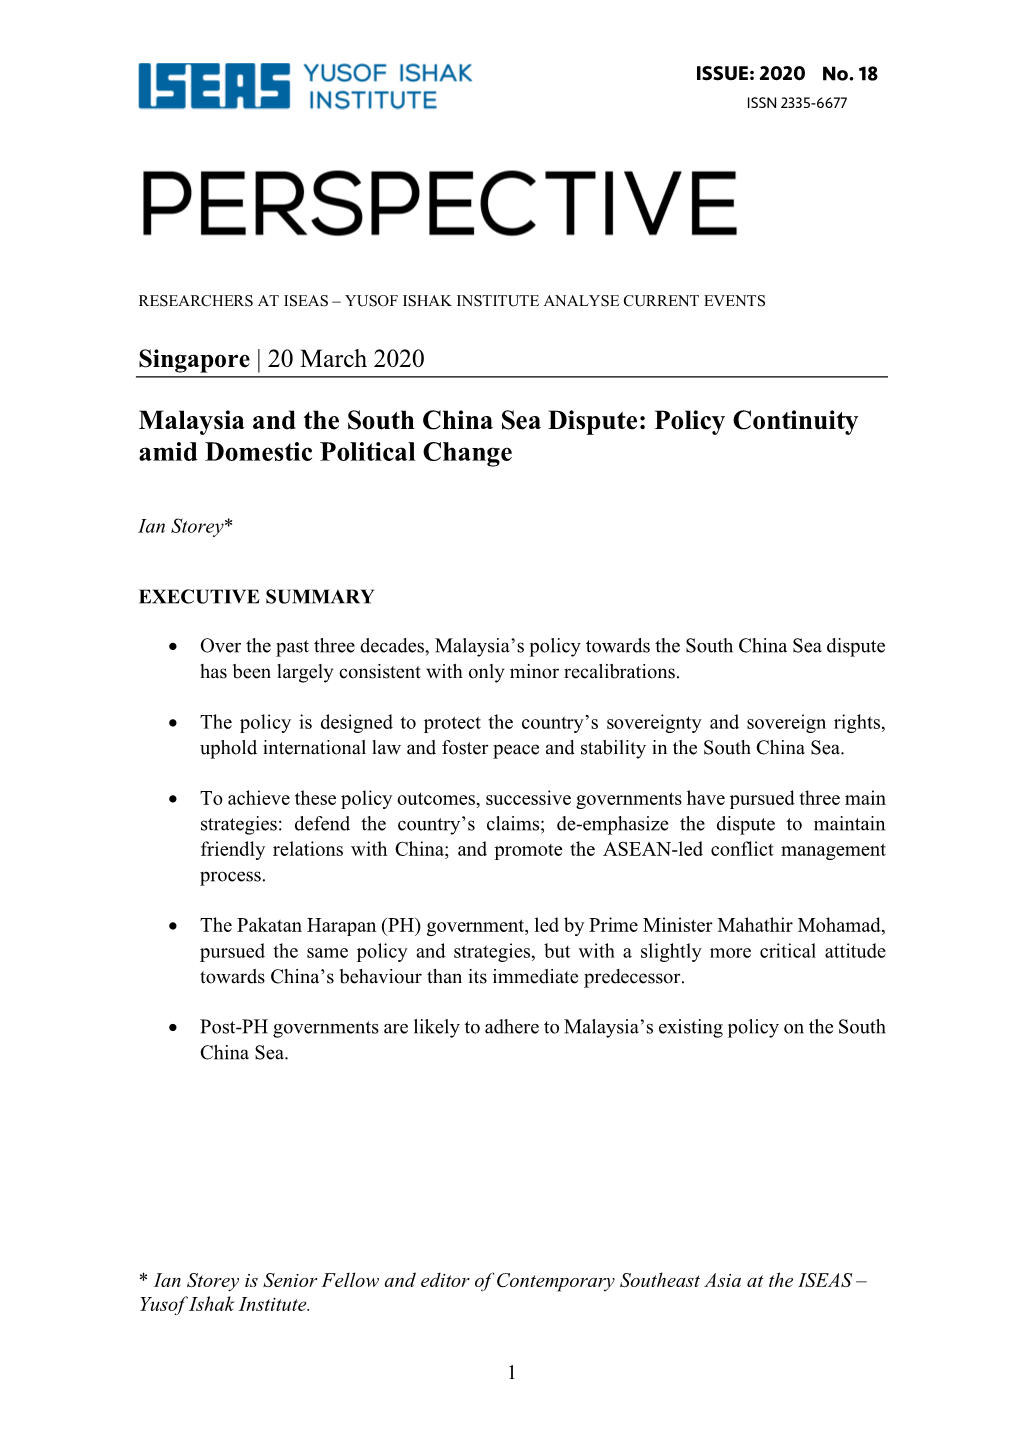 Malaysia and the South China Sea Dispute: Policy Continuity Amid Domestic Political Change